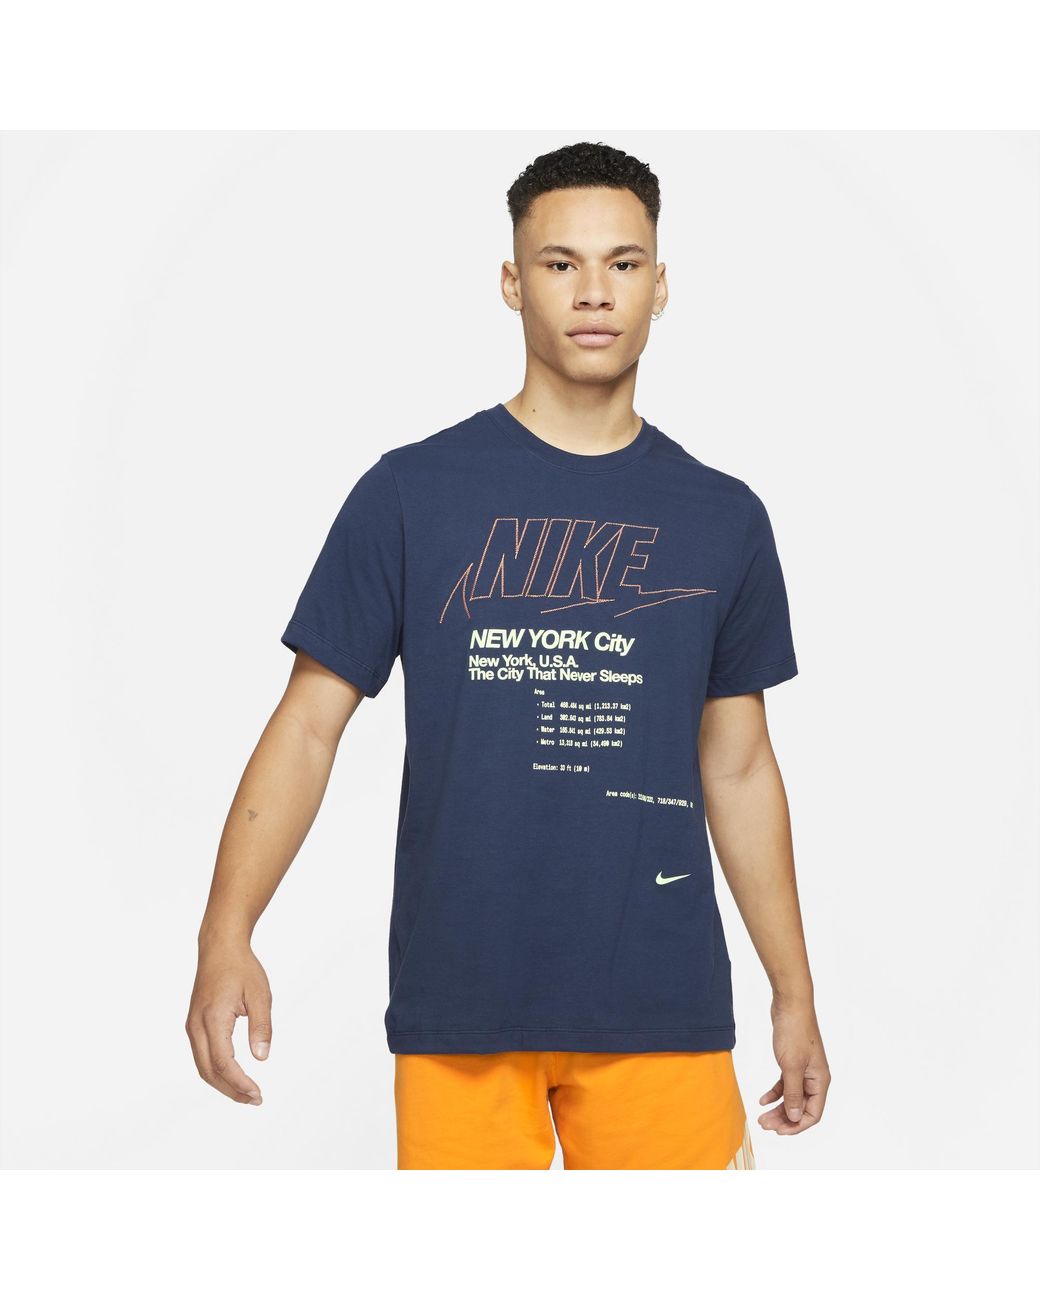 Nike Cotton Nyc City T-shirt in Navy/Navy (Blue) for Men - Lyst